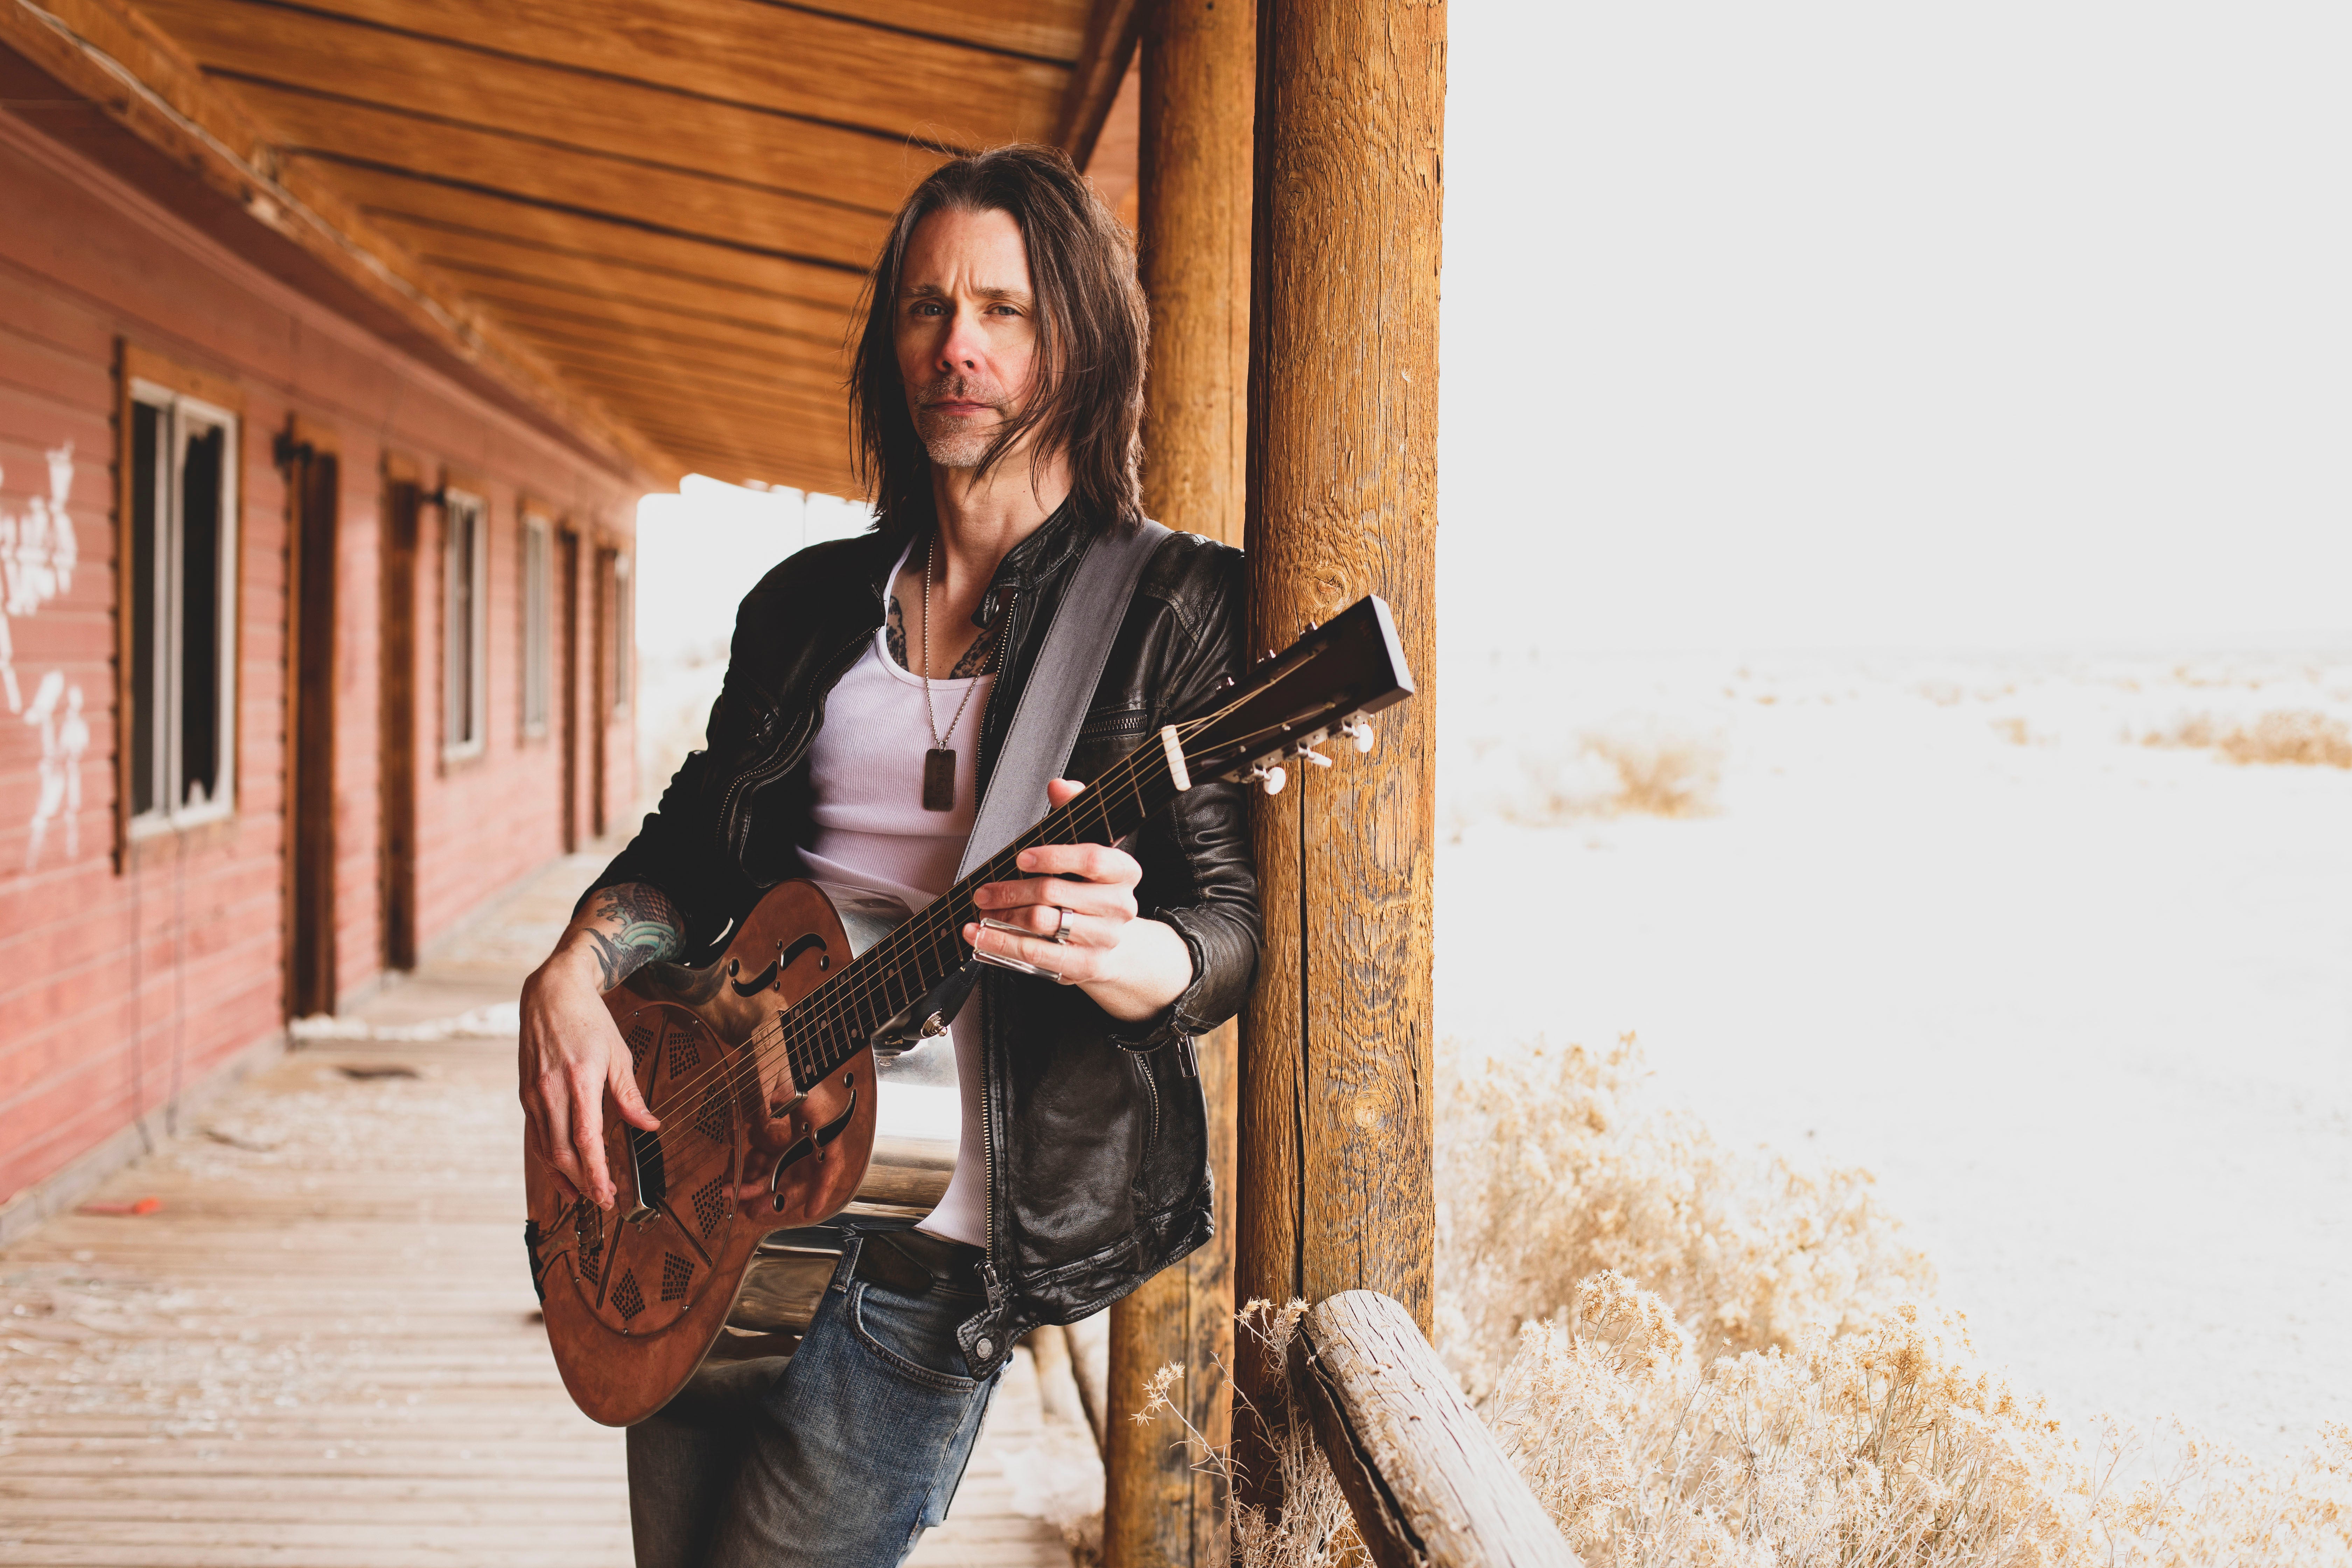 members only presale code for Myles Kennedy face value tickets in Manchester